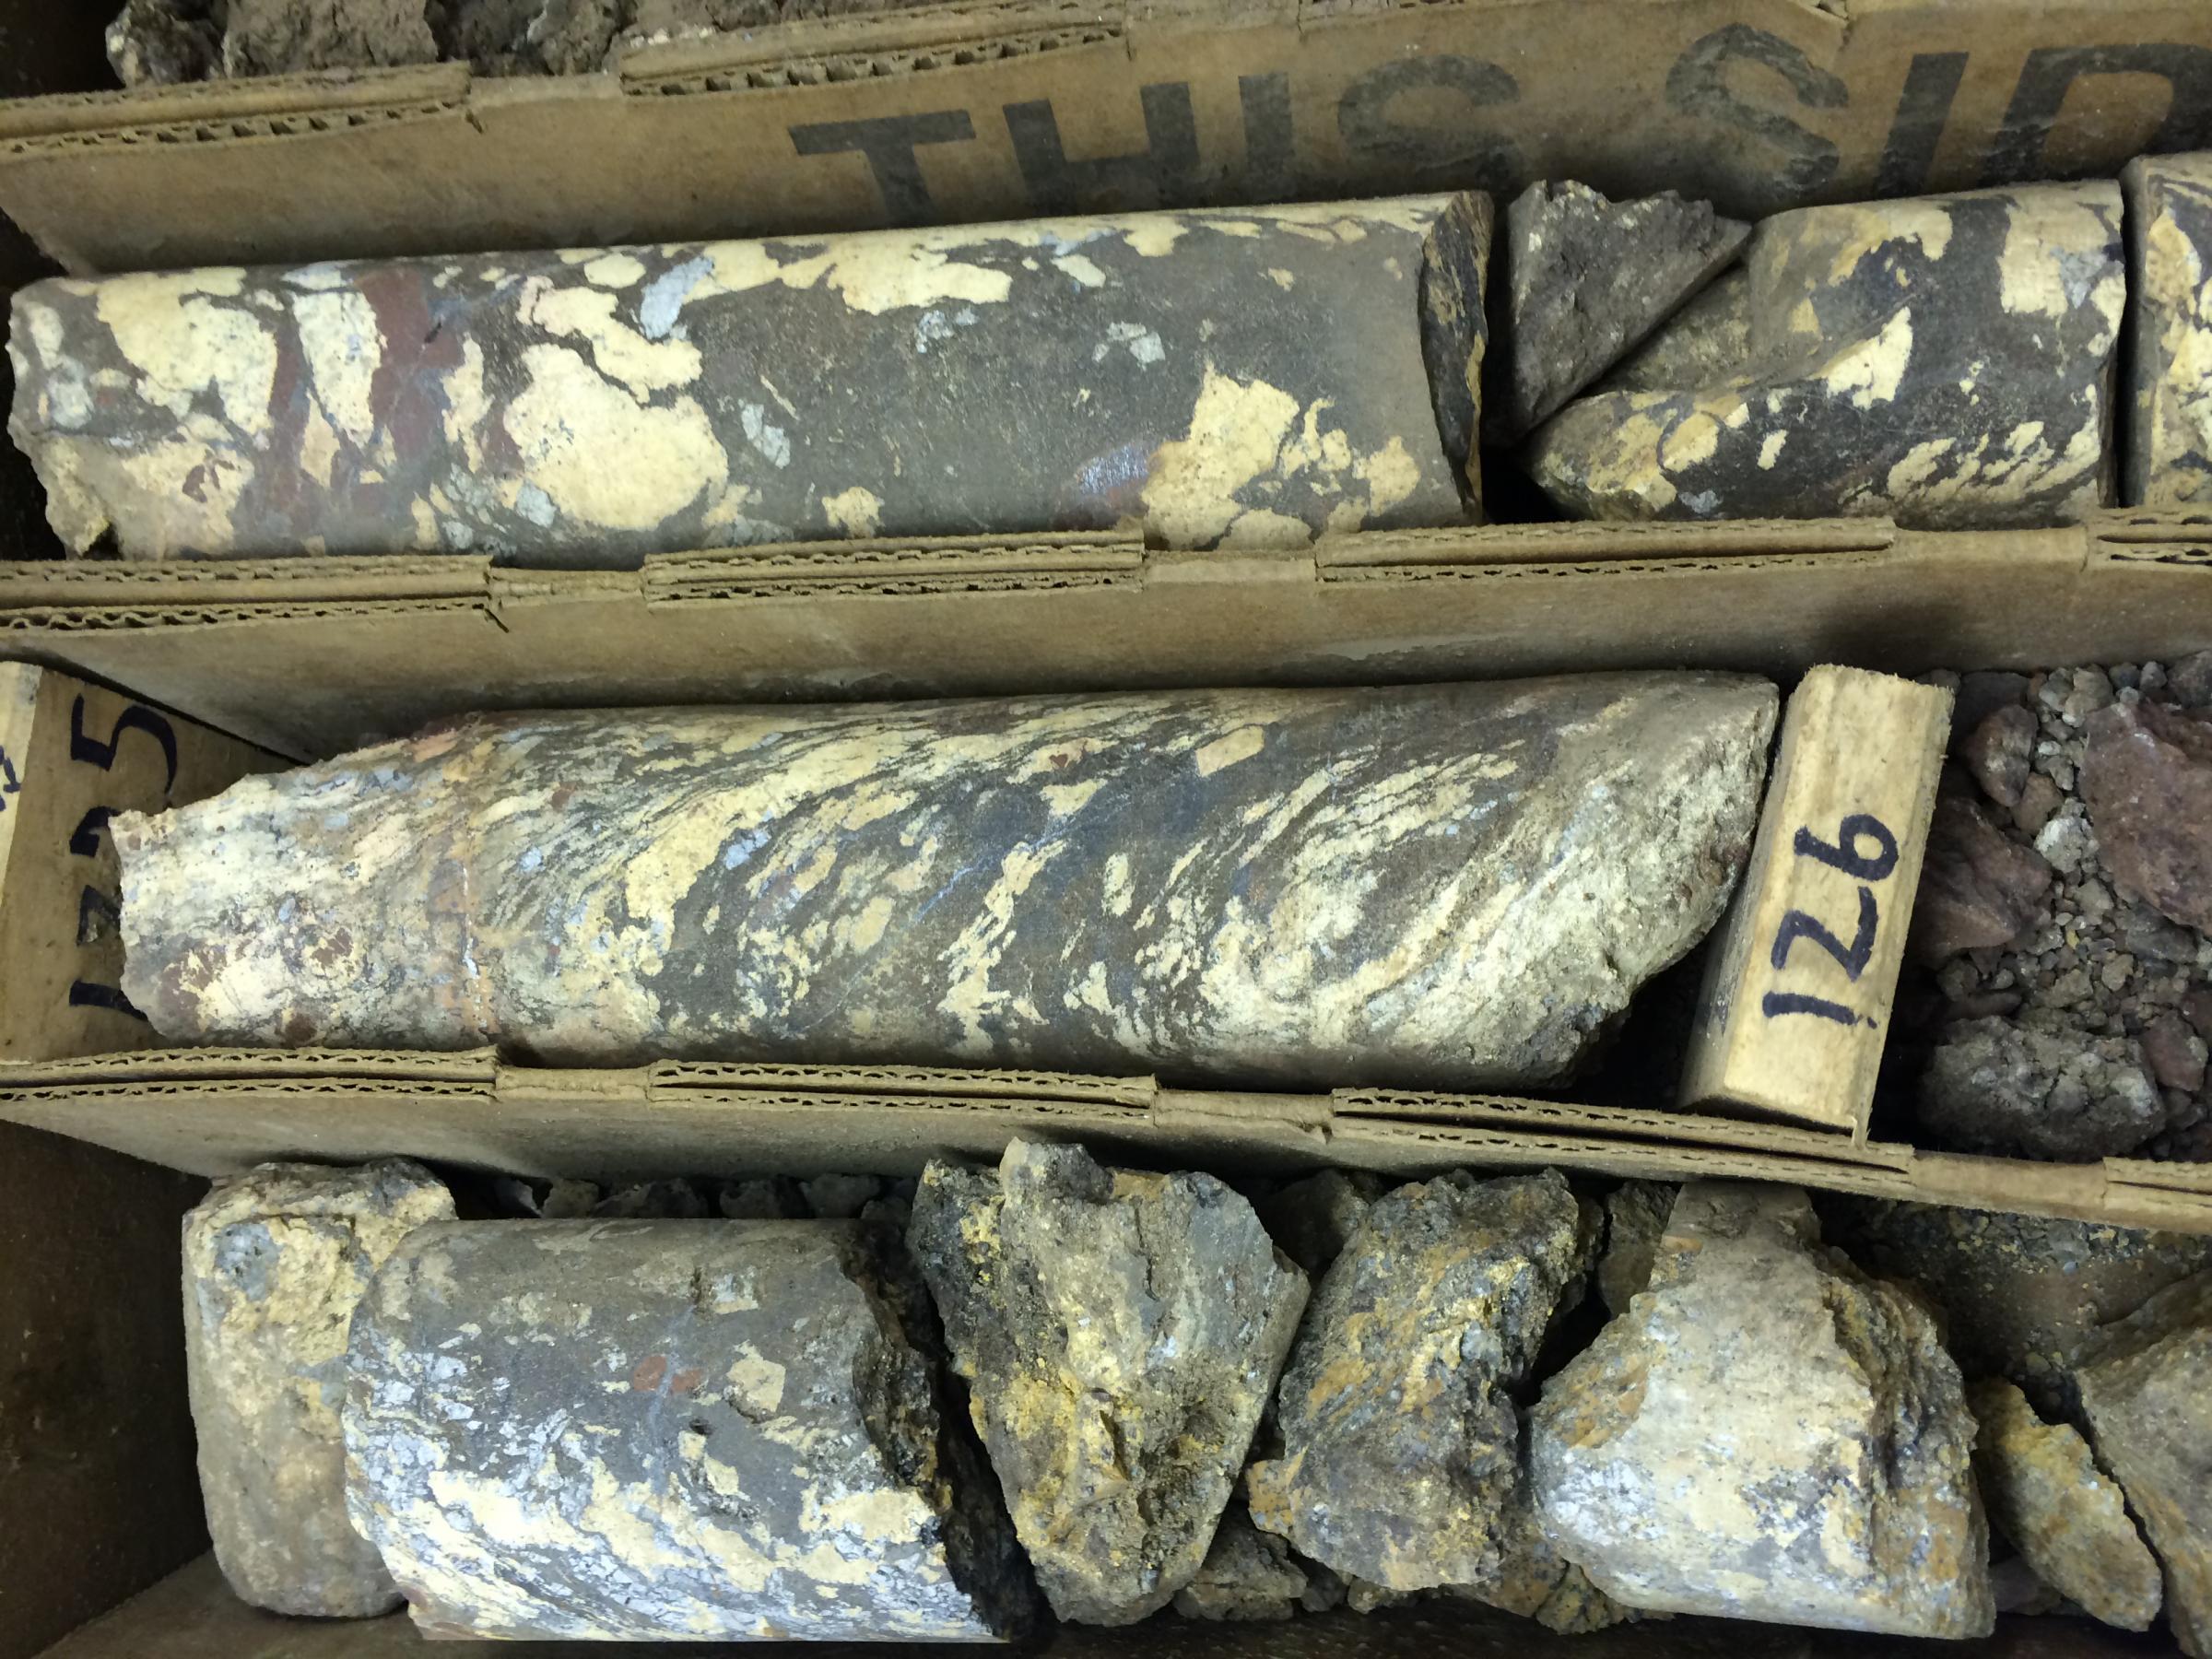 Rare Earth Metals Mine Moves Forward In Permitting Process | Wyoming ...